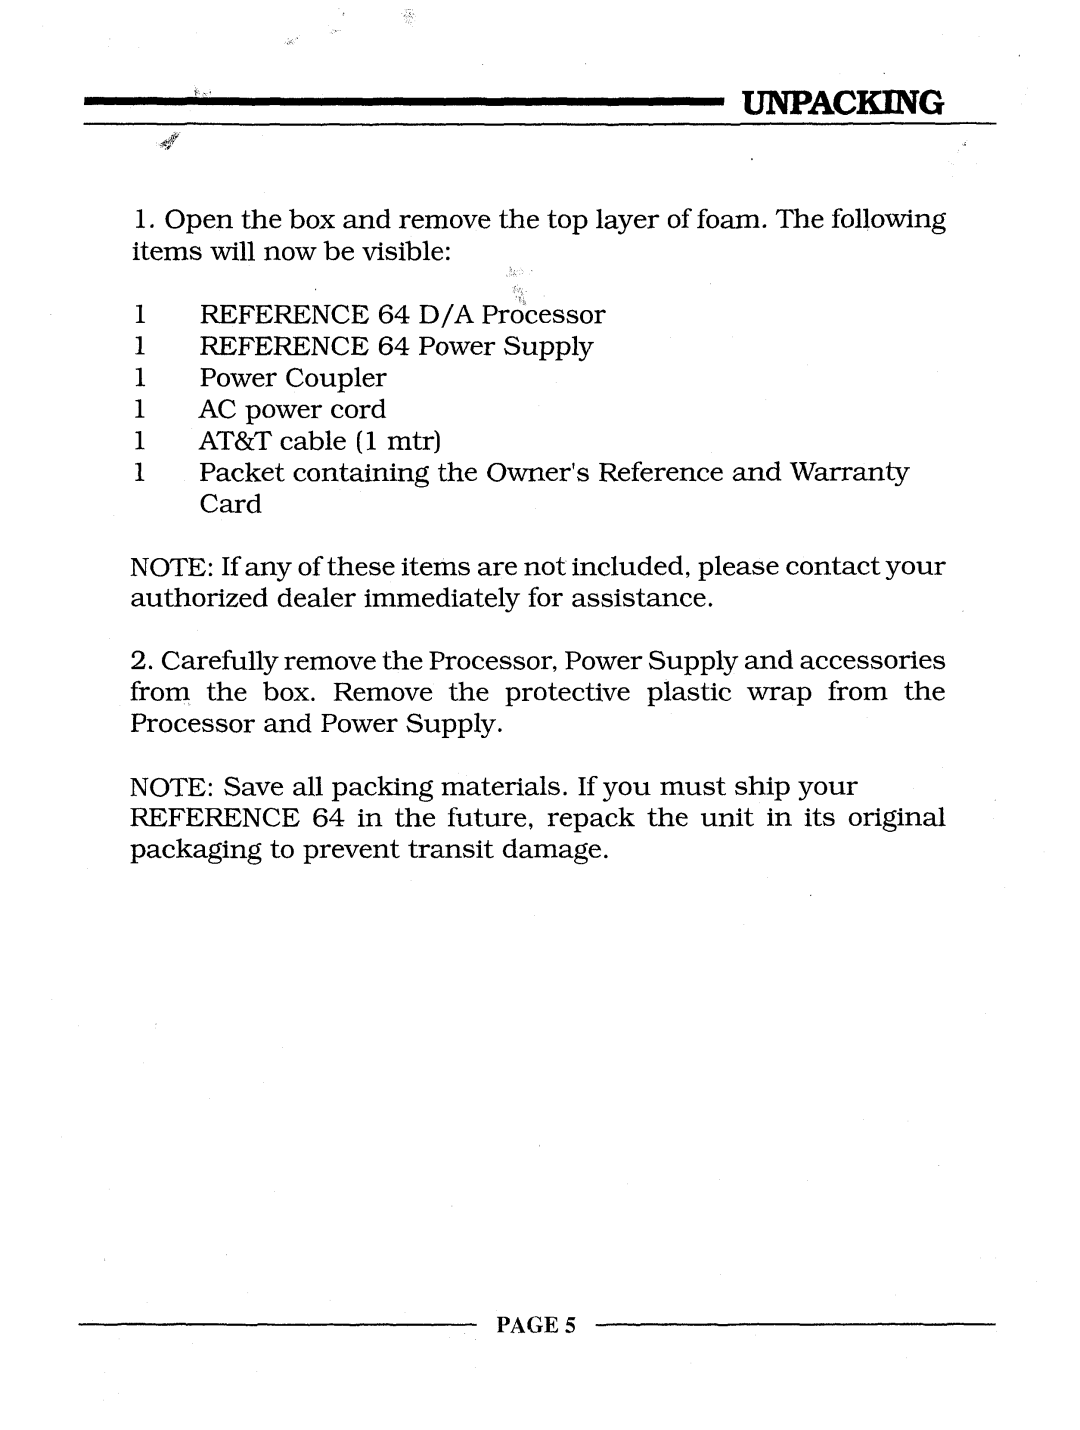 Krell Industries REFERENCE 64 manual Unpacking, PAGE5 